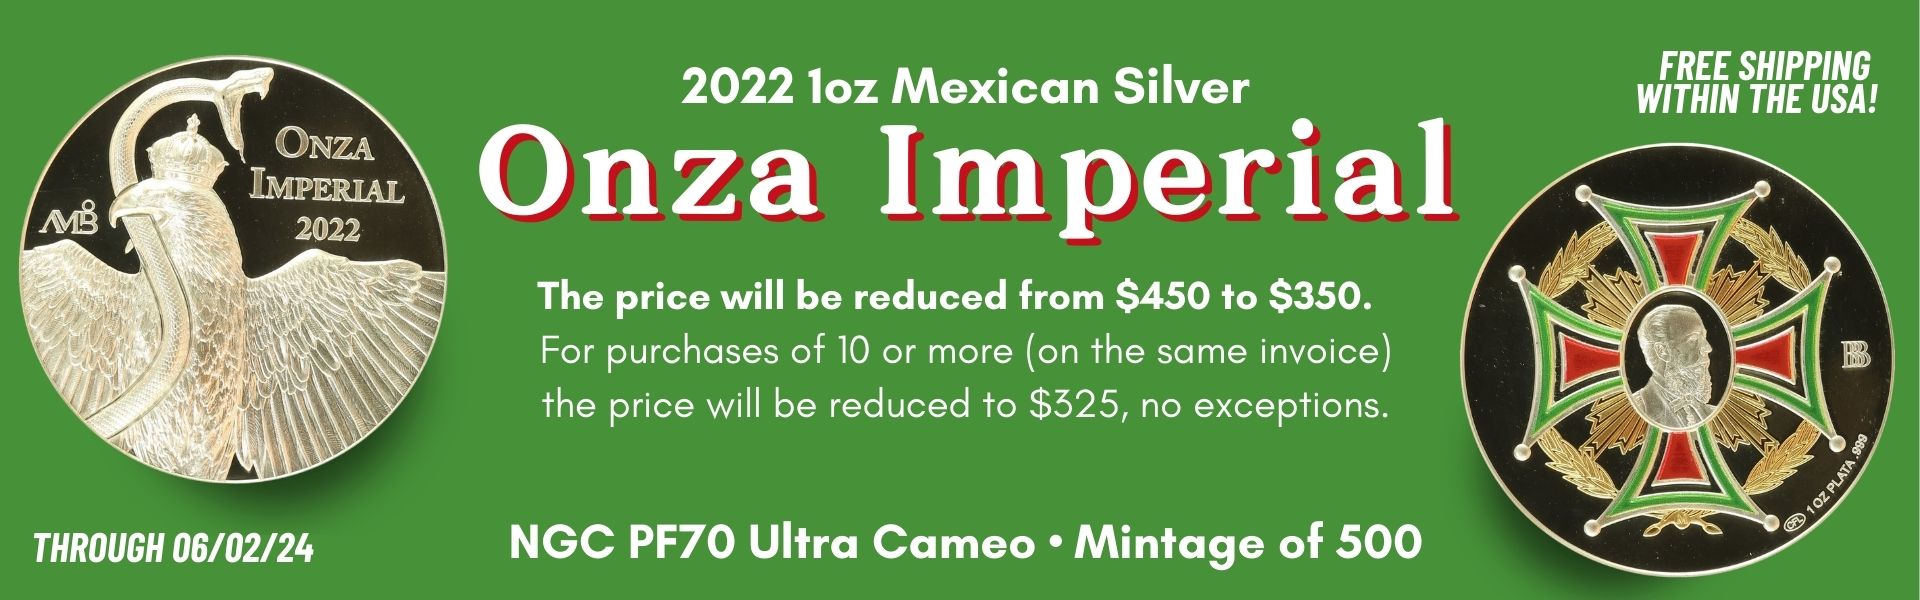 Mexican Silver Onza Imperial Coin Sale